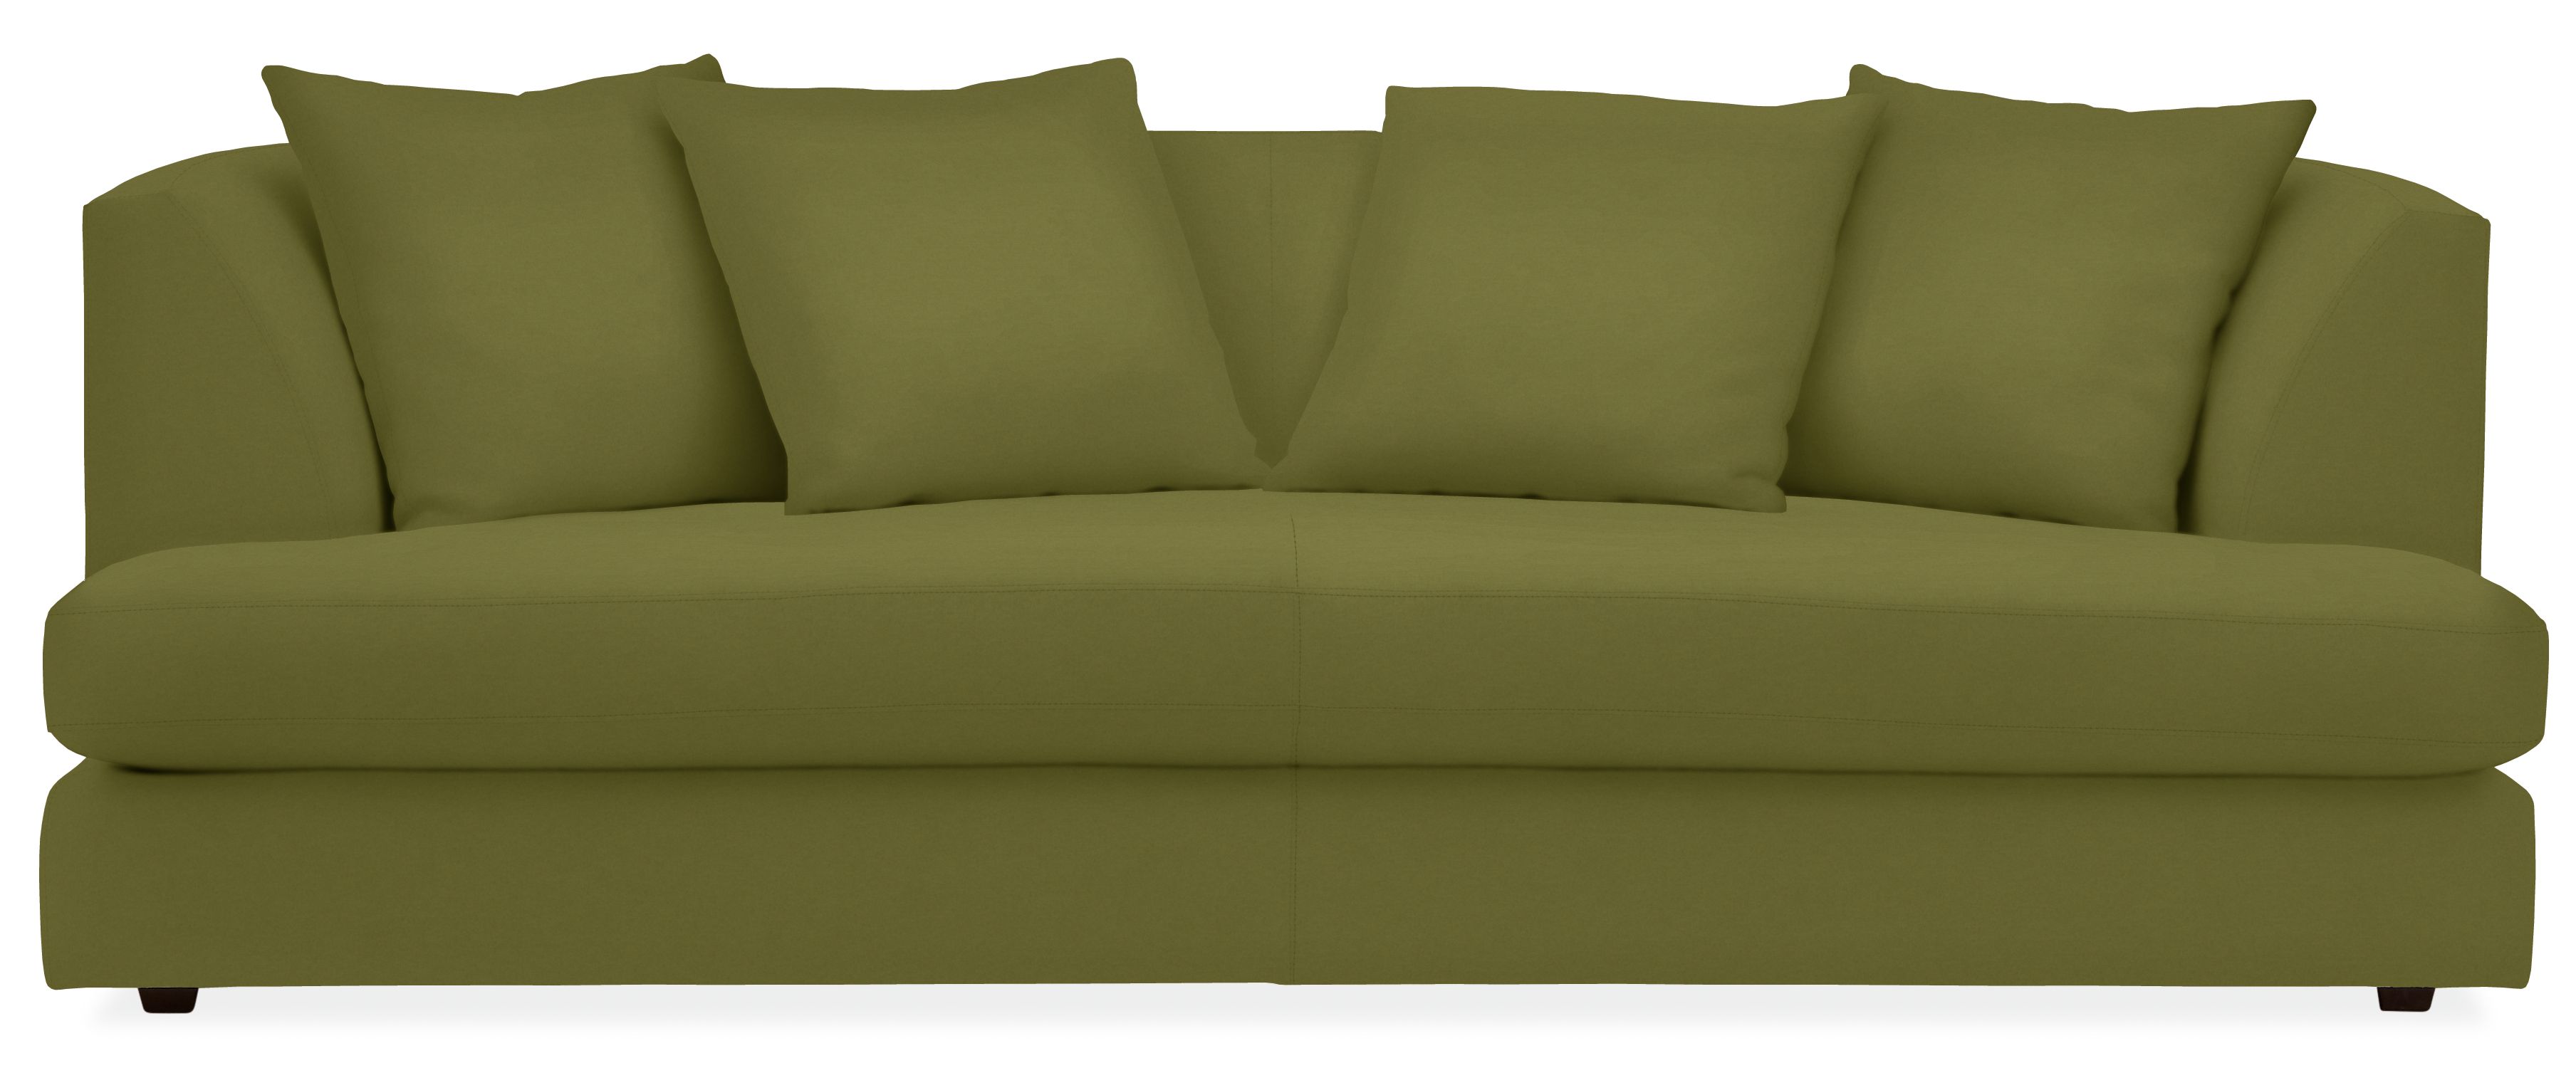 Astaire Bench Cushion Sofas - Modern Living Room Furniture - Room & Board